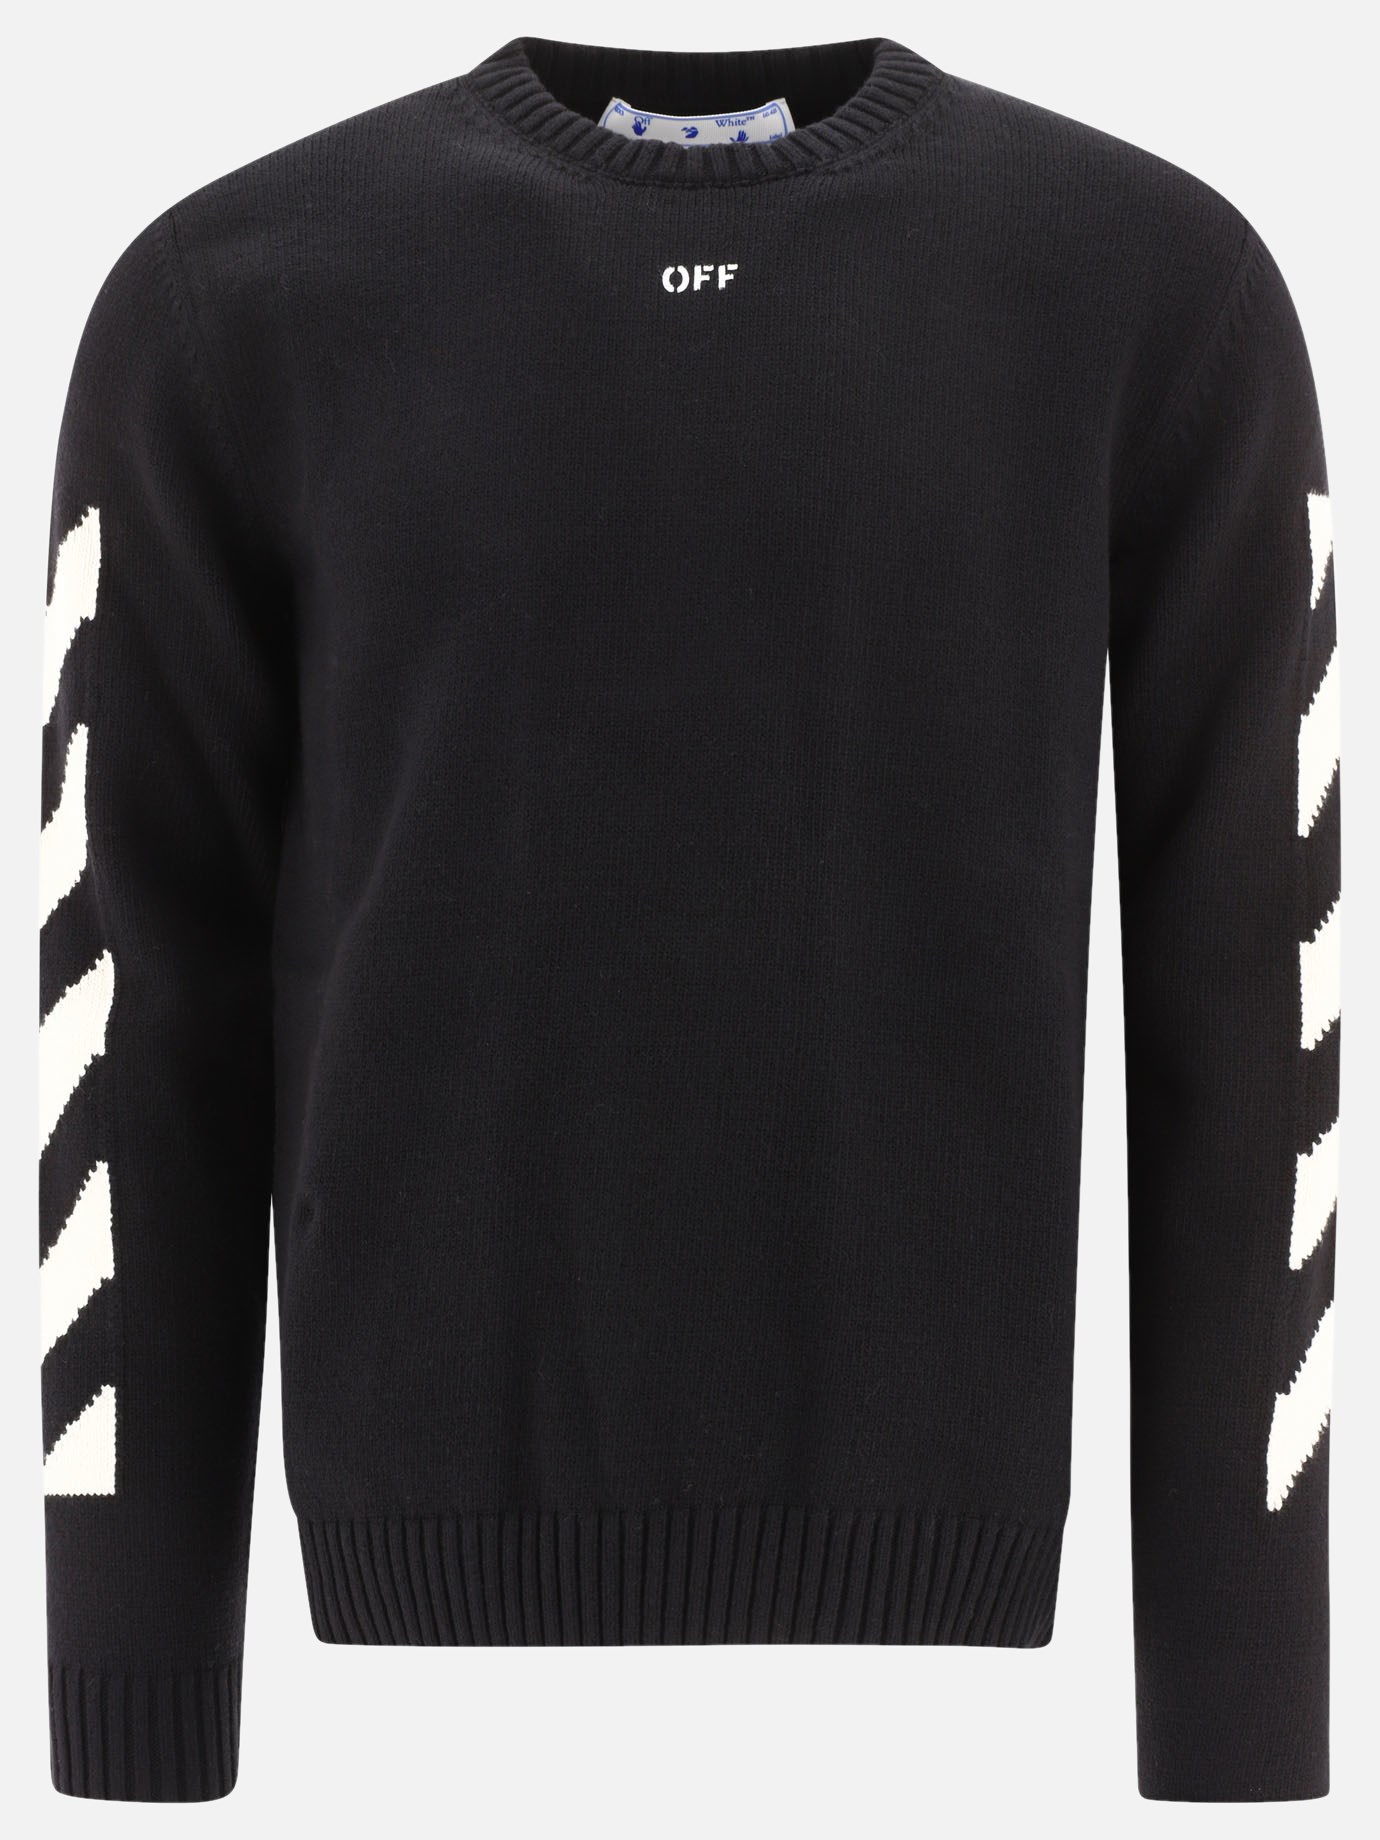  Diag Arrow  sweaterby Off-White - 2